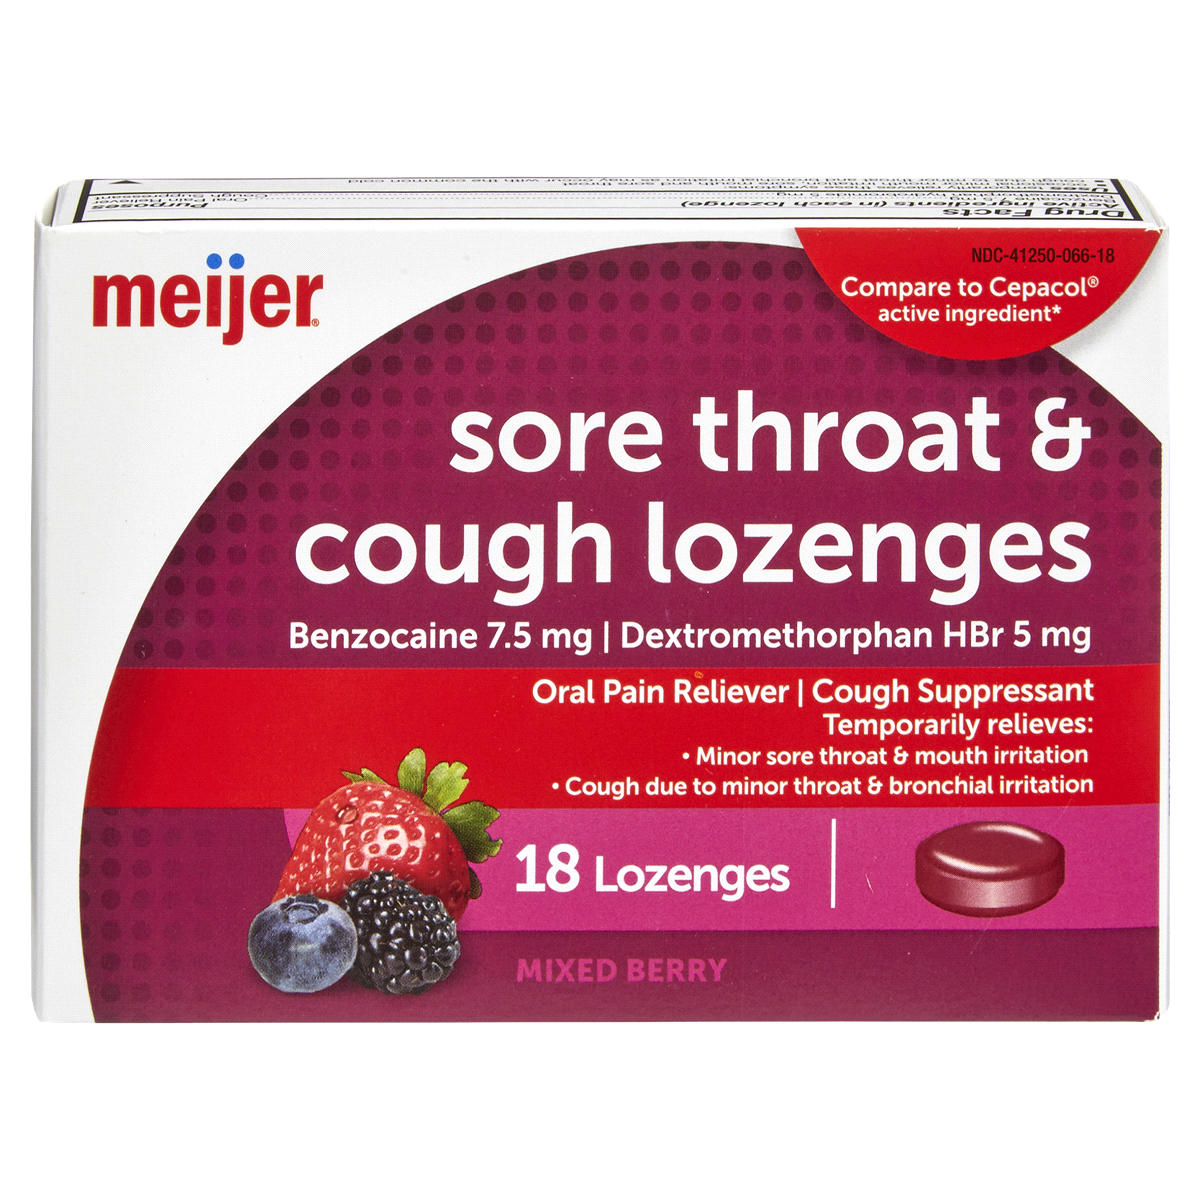 slide 1 of 4, Meijer Sore Throat & Cough Lozenges Mixed Berry
, 18 ct